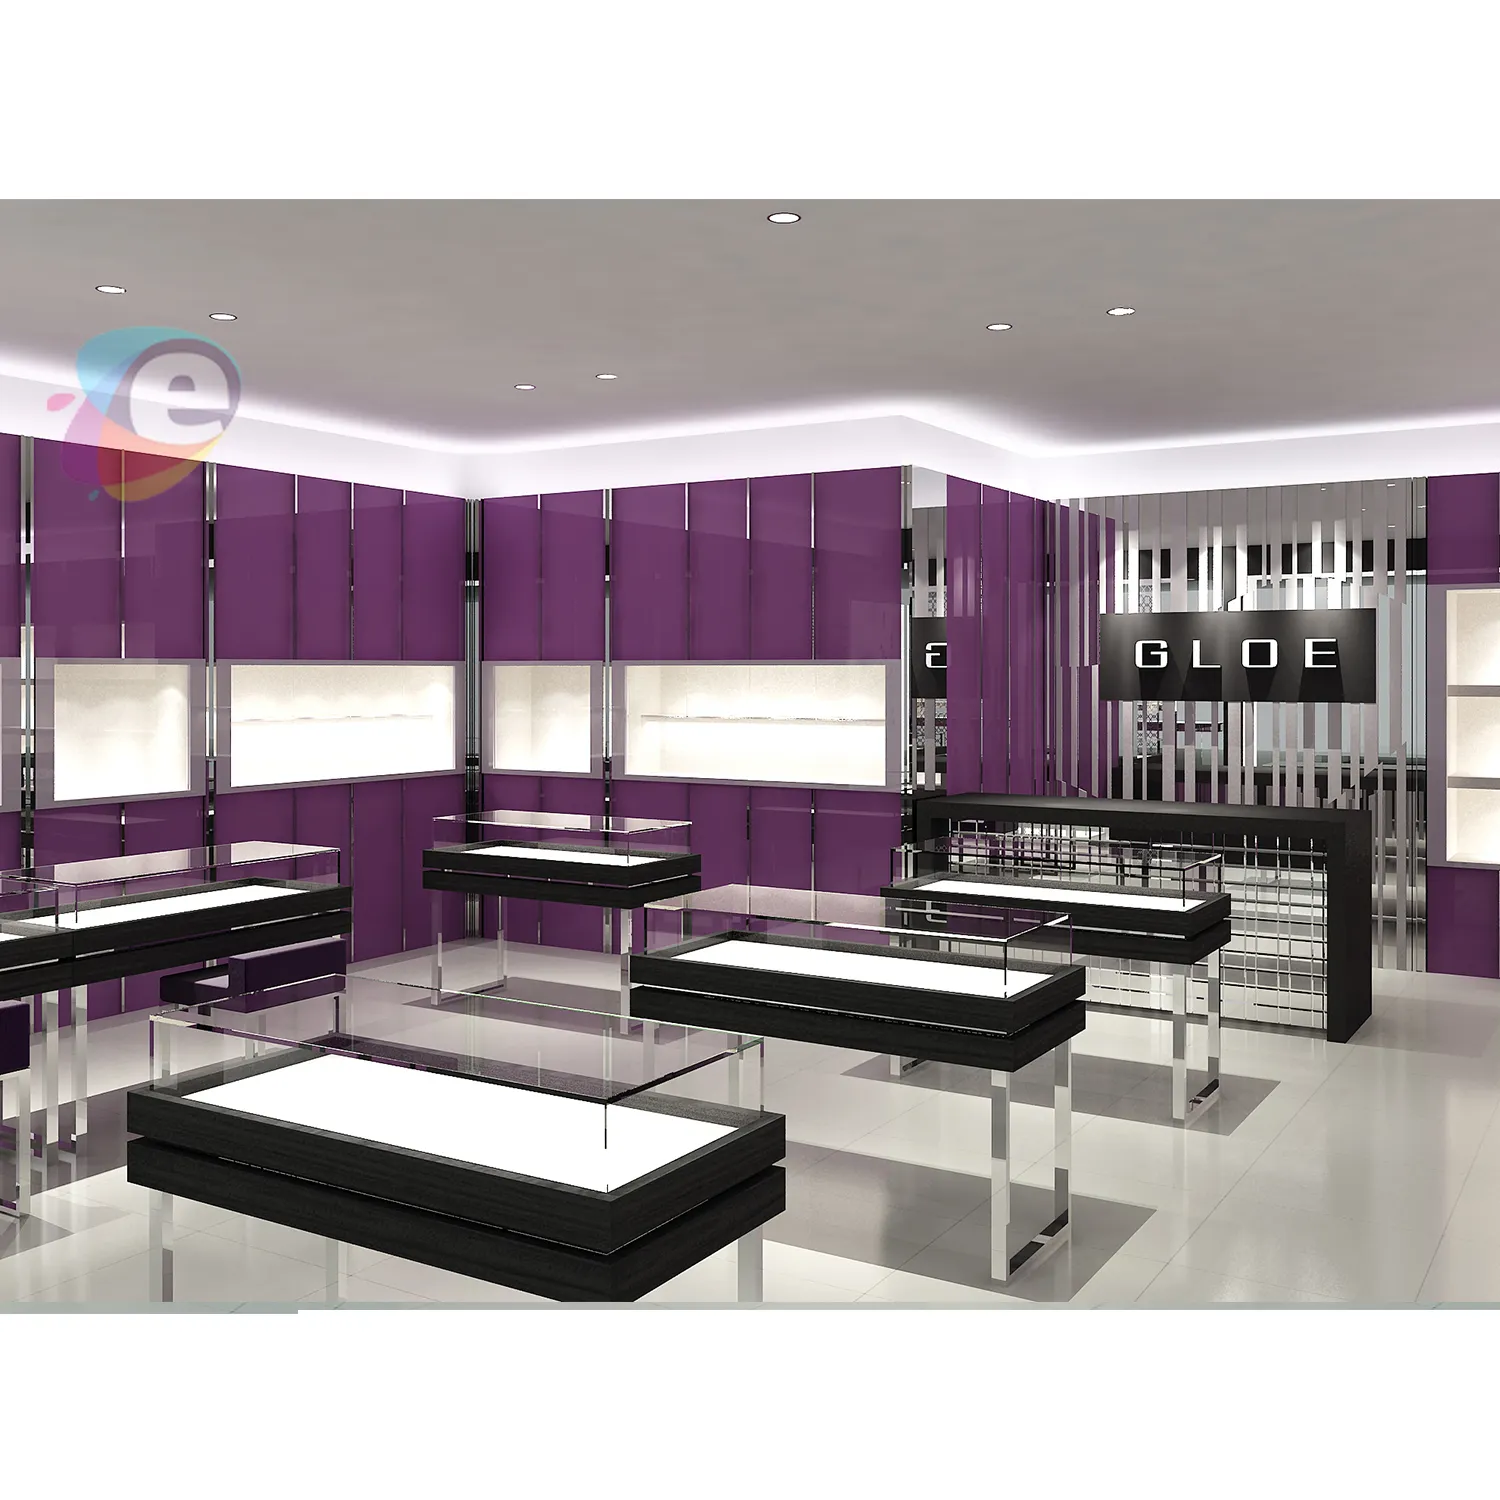 Rechi Provide Retail glass Store Interior Design & Retail Fitout Service To Enhance Your Brand Image & Customer Experience OEM